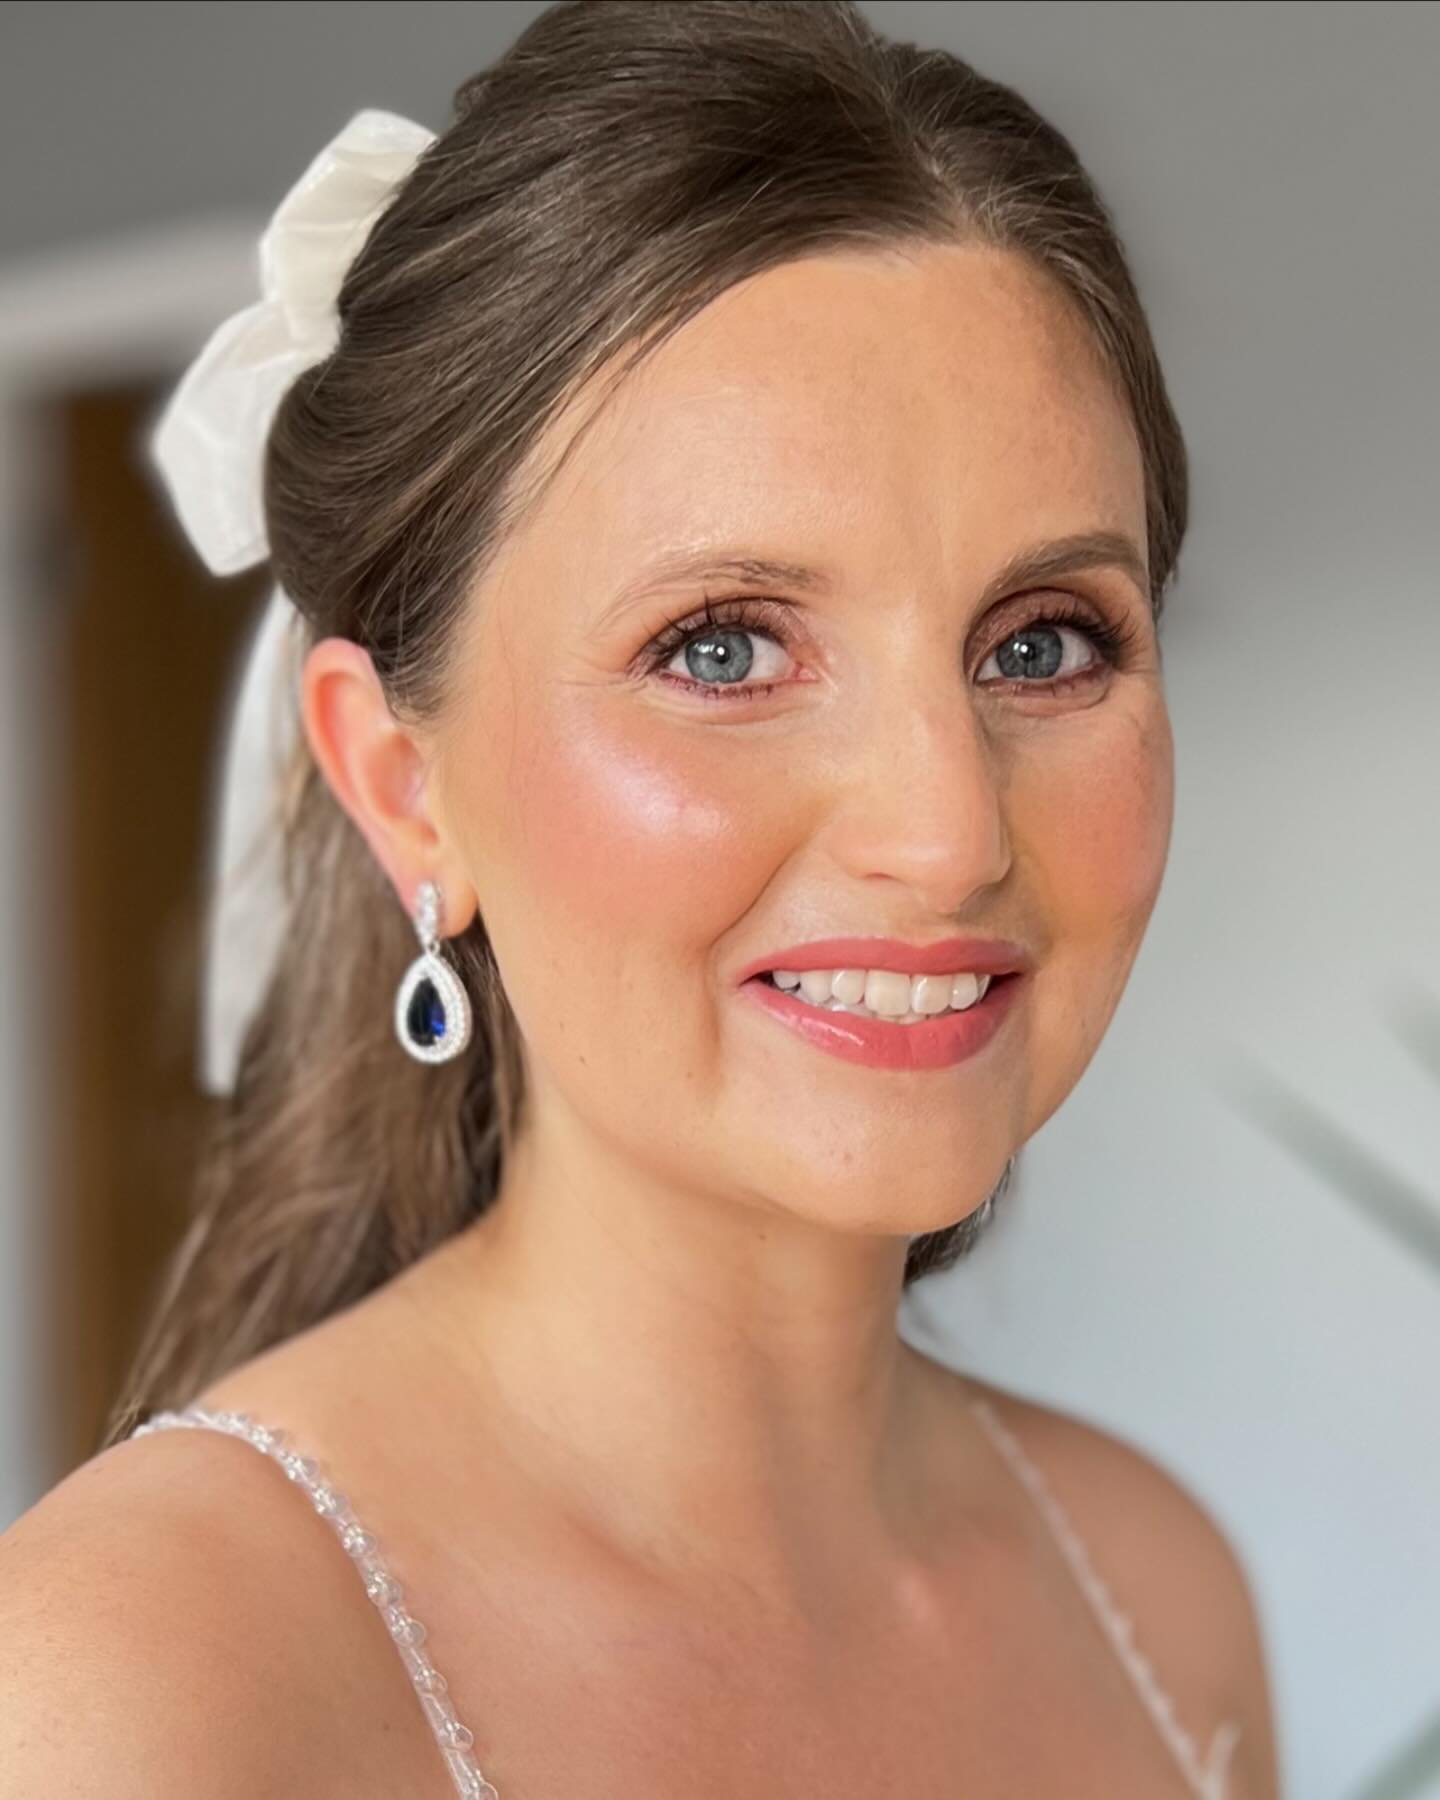 Today&rsquo;s ABSOLUTE BEAUTY! Lovely Lauren. 

Key products for this rosy bridal glow:

@charlottetilbury Flawless Filter, Pillowtalk lipliner &amp; Wedding Belles lipstick
@lancomeofficial Teint Idole Foundation
@hourglasscosmetics Vanish Concealer